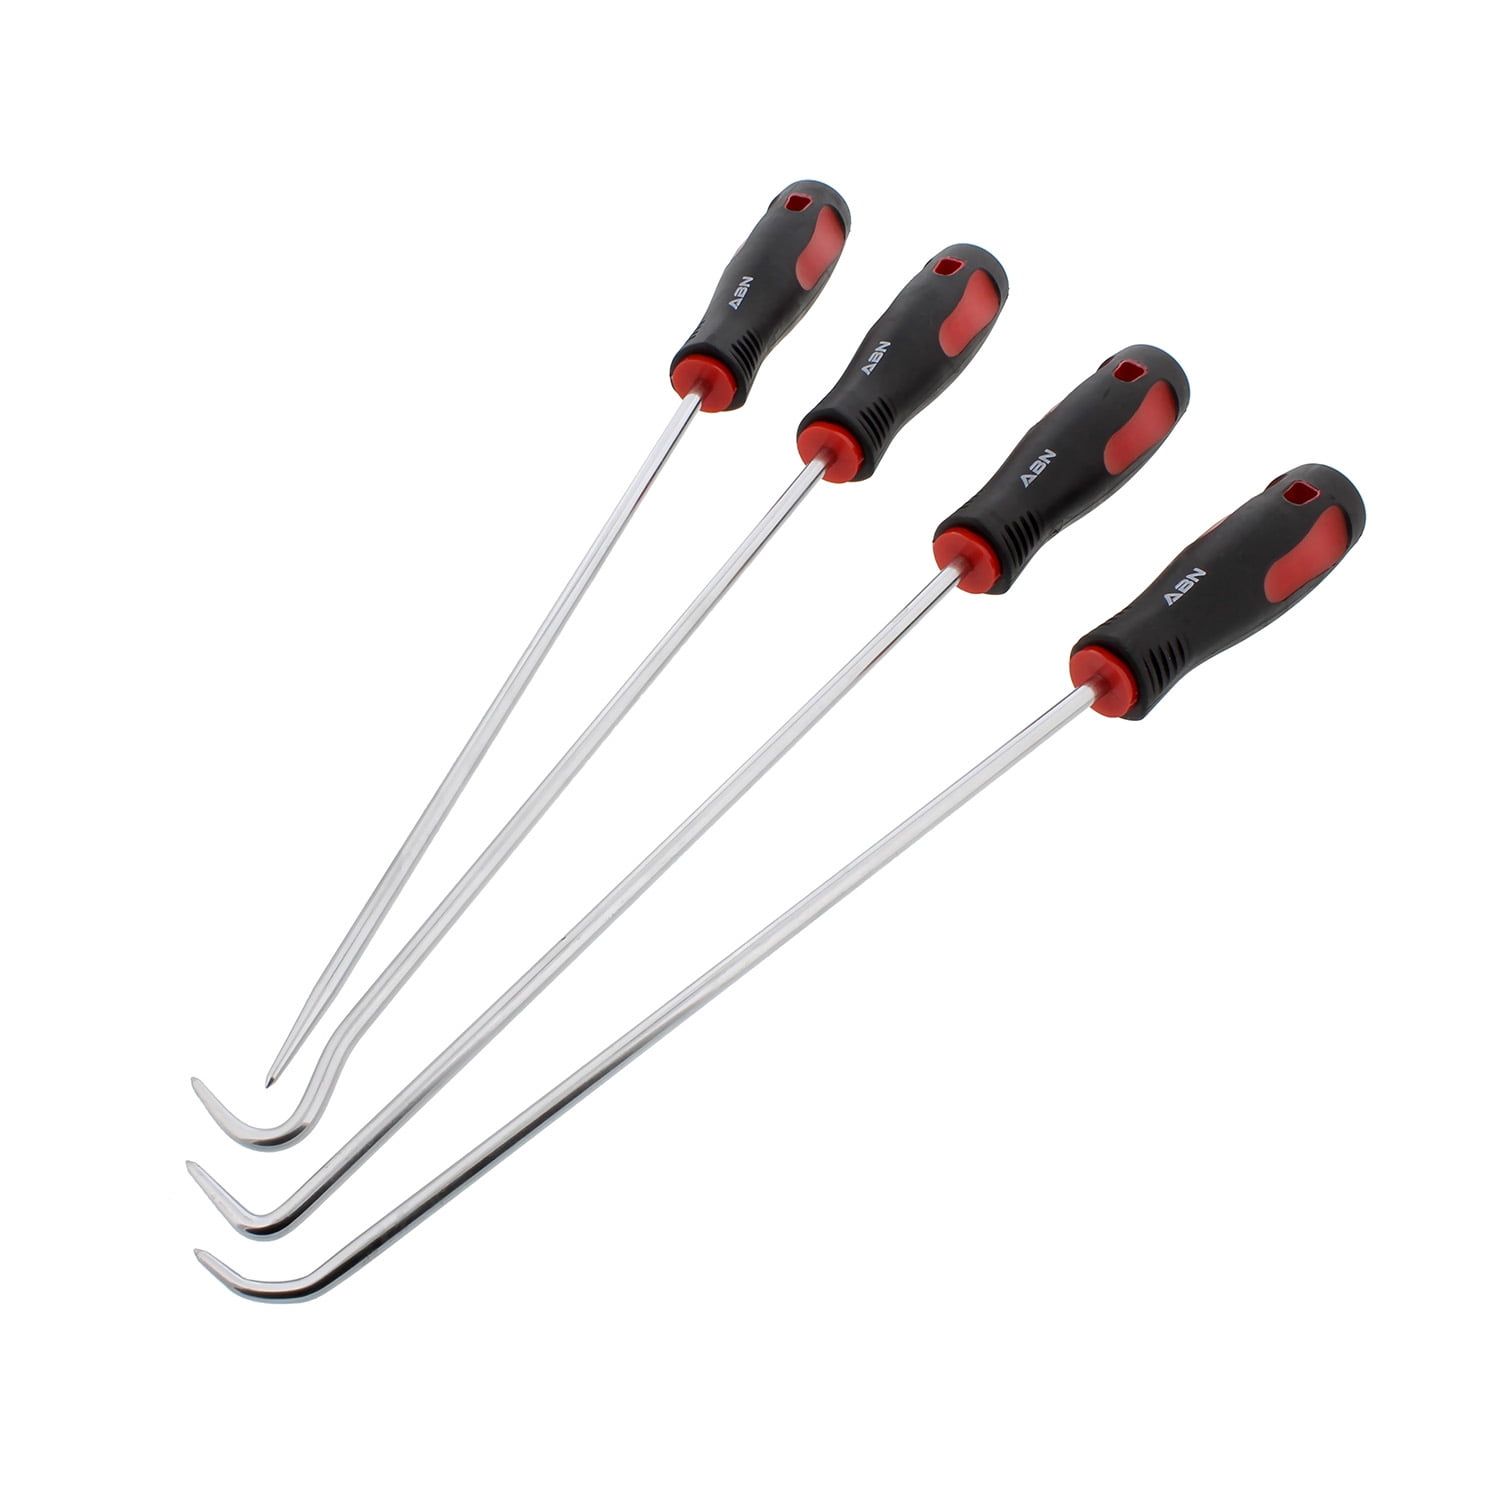 4 Piece Mini Hook & Pick Set Great For Professional And Car DIY Use Useful Tool 